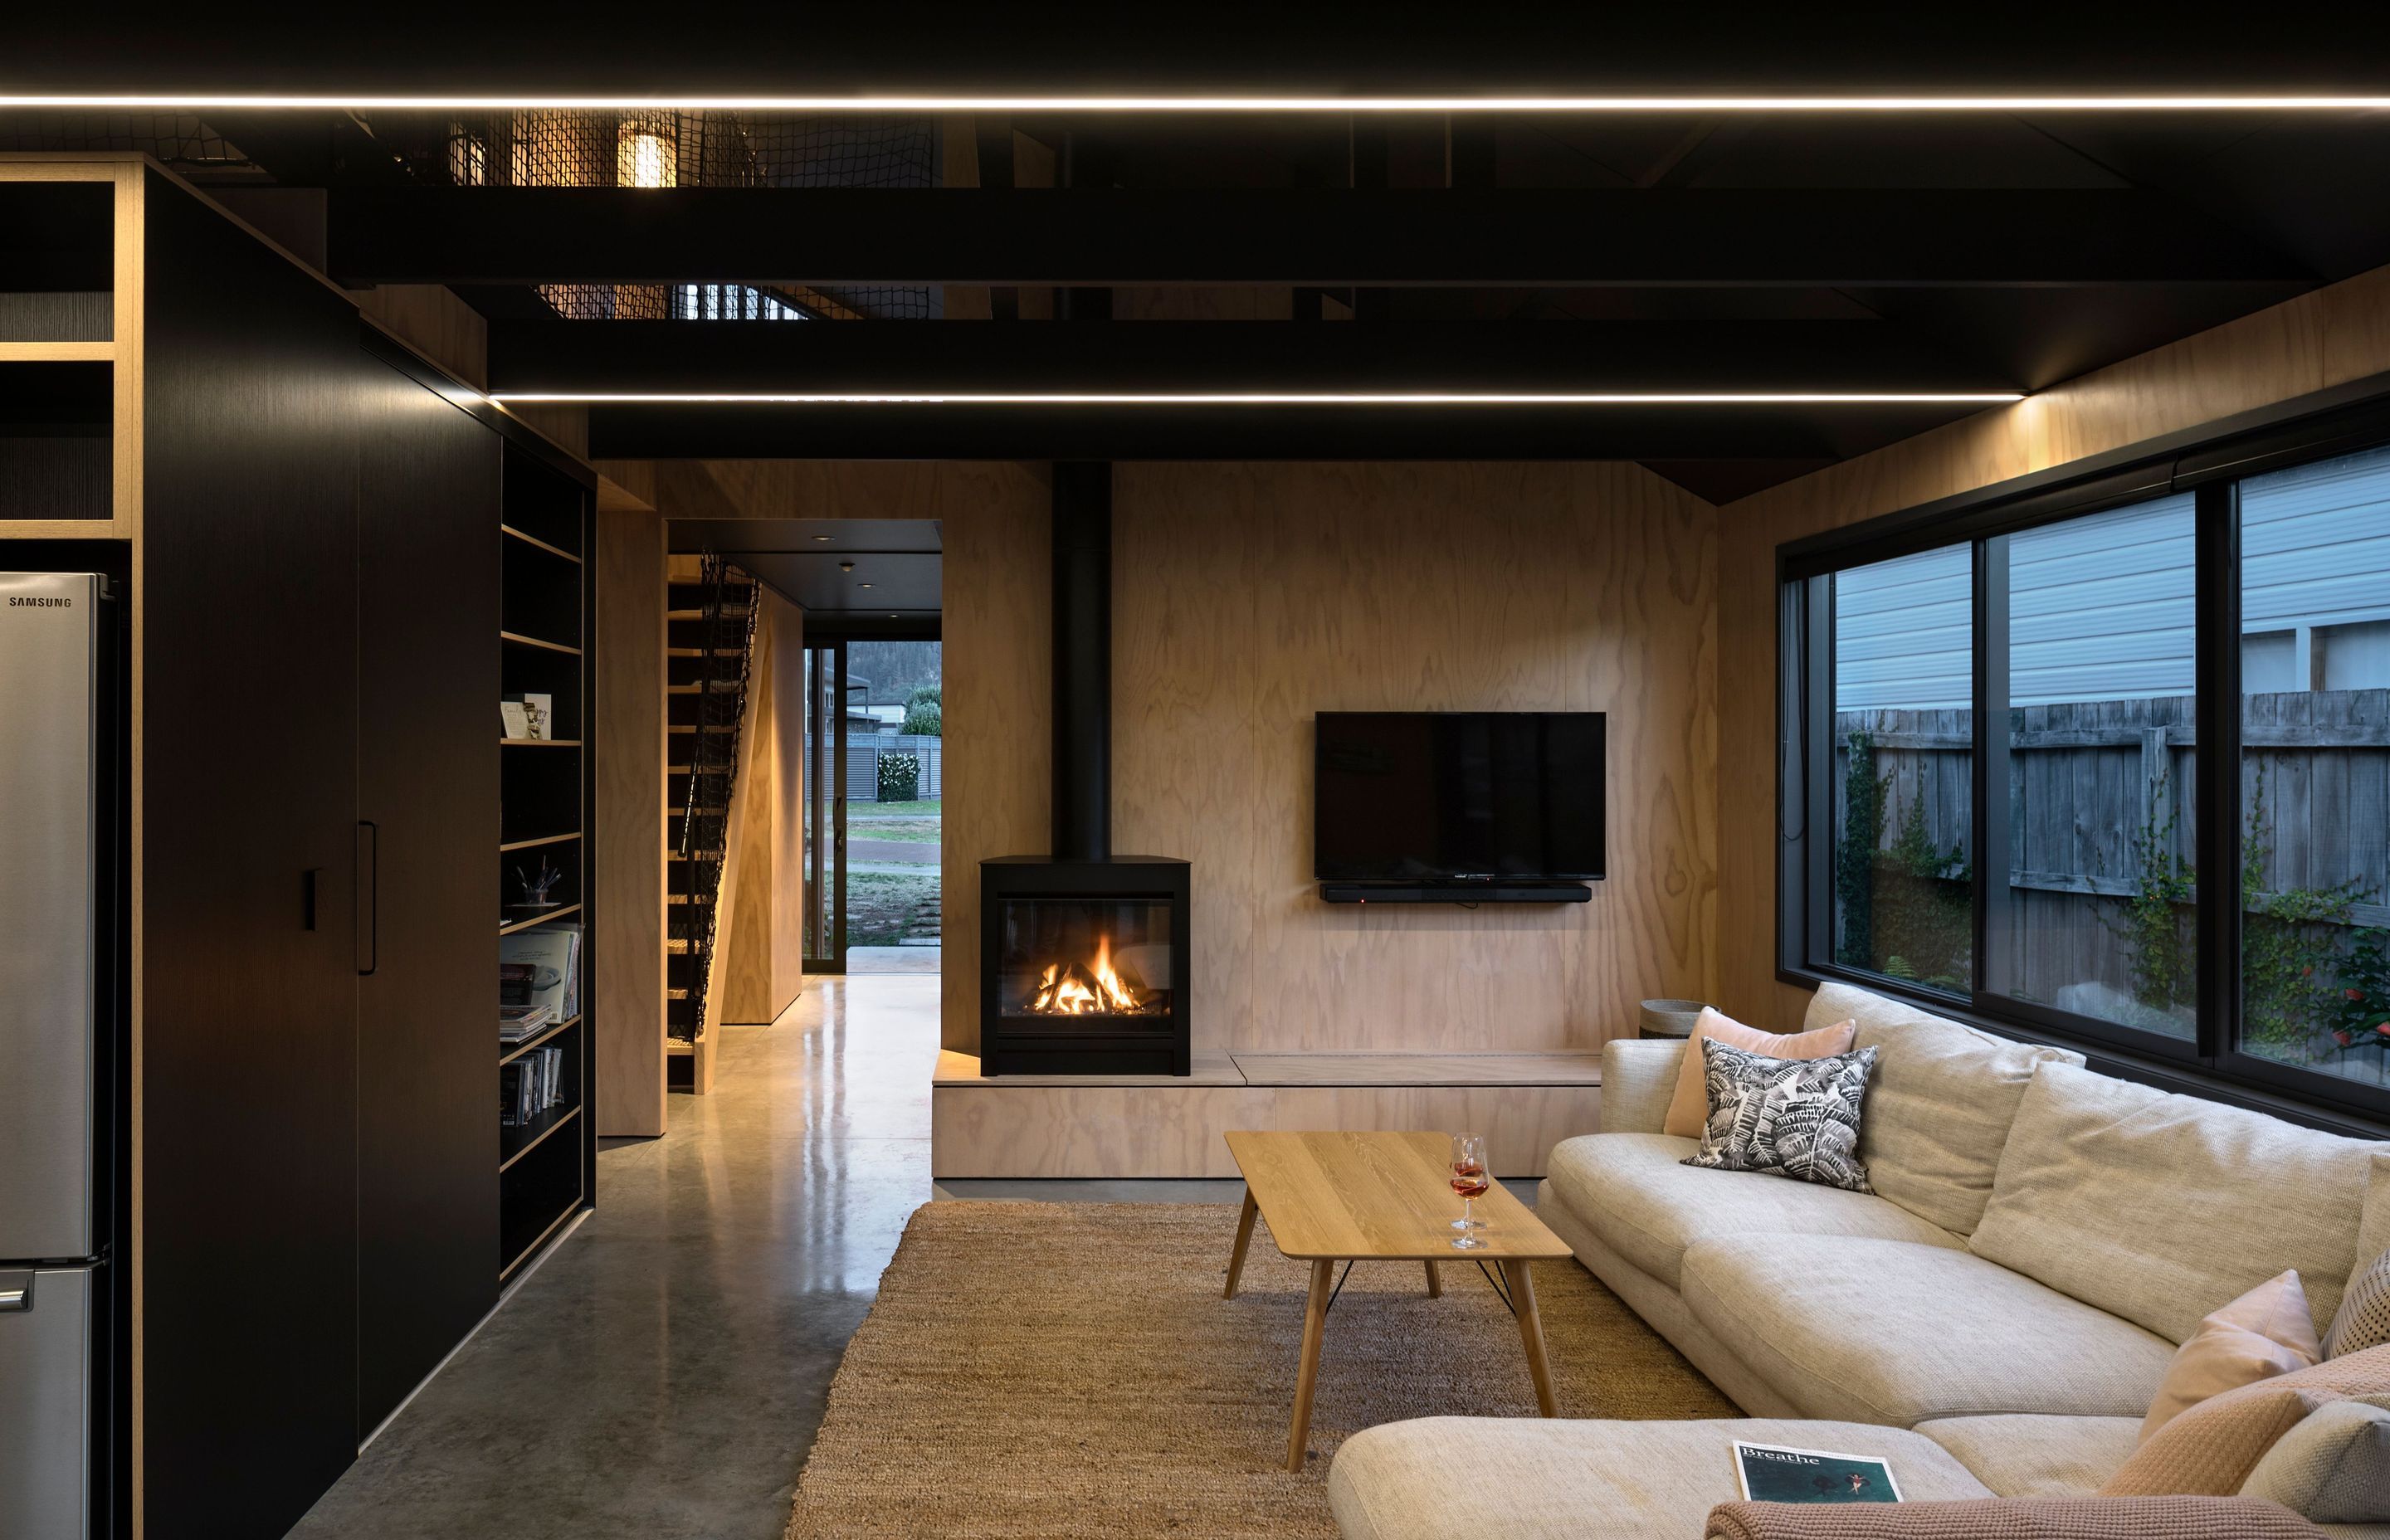 The inclusion of the fireplace means that Teranui can be used year-round.